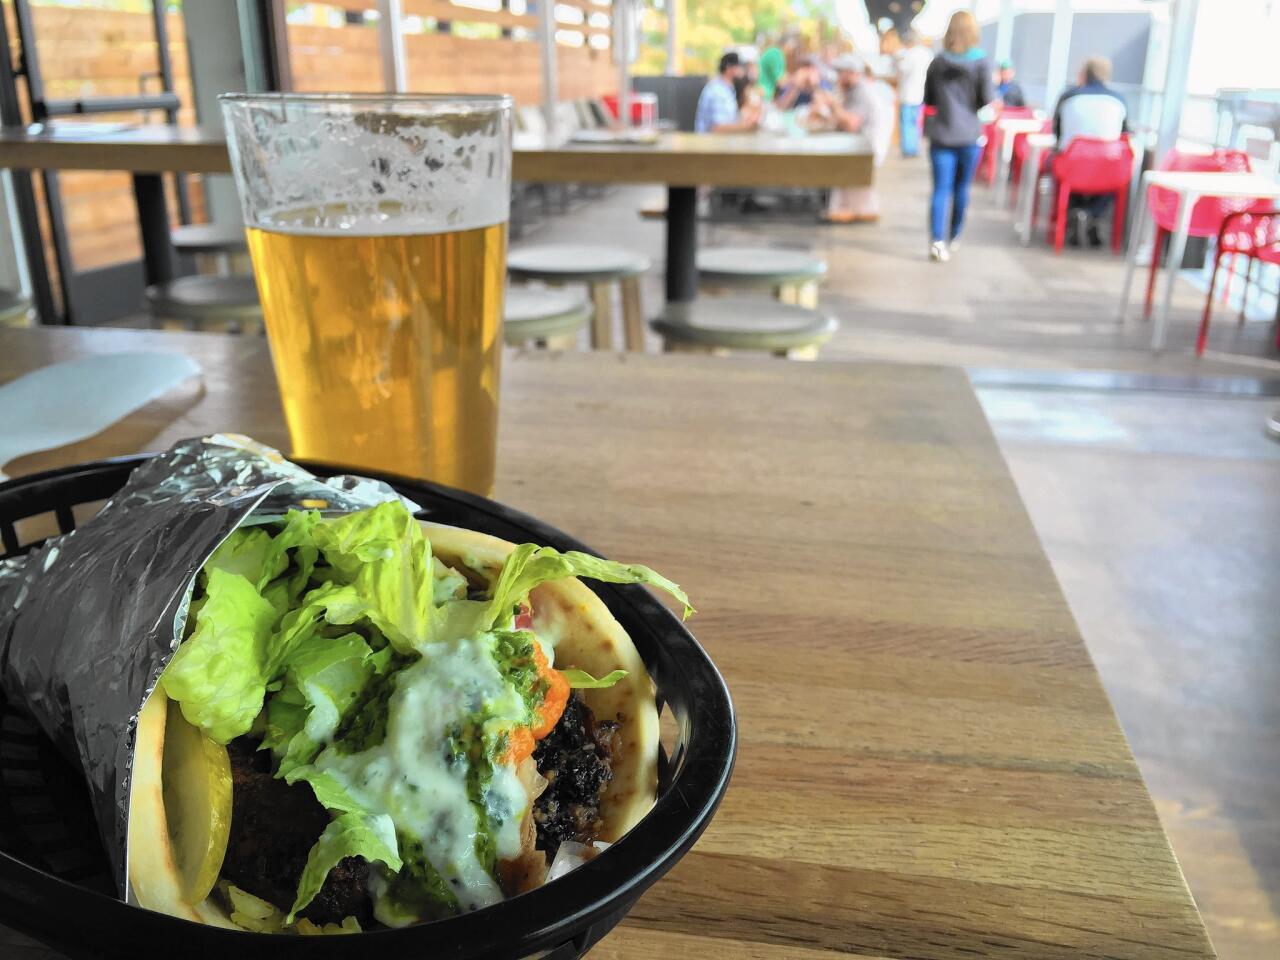 Beer and a chicken shawarma/falafel sandwich from Souk Shawarma at Avanti Food & Beverage in Denver.